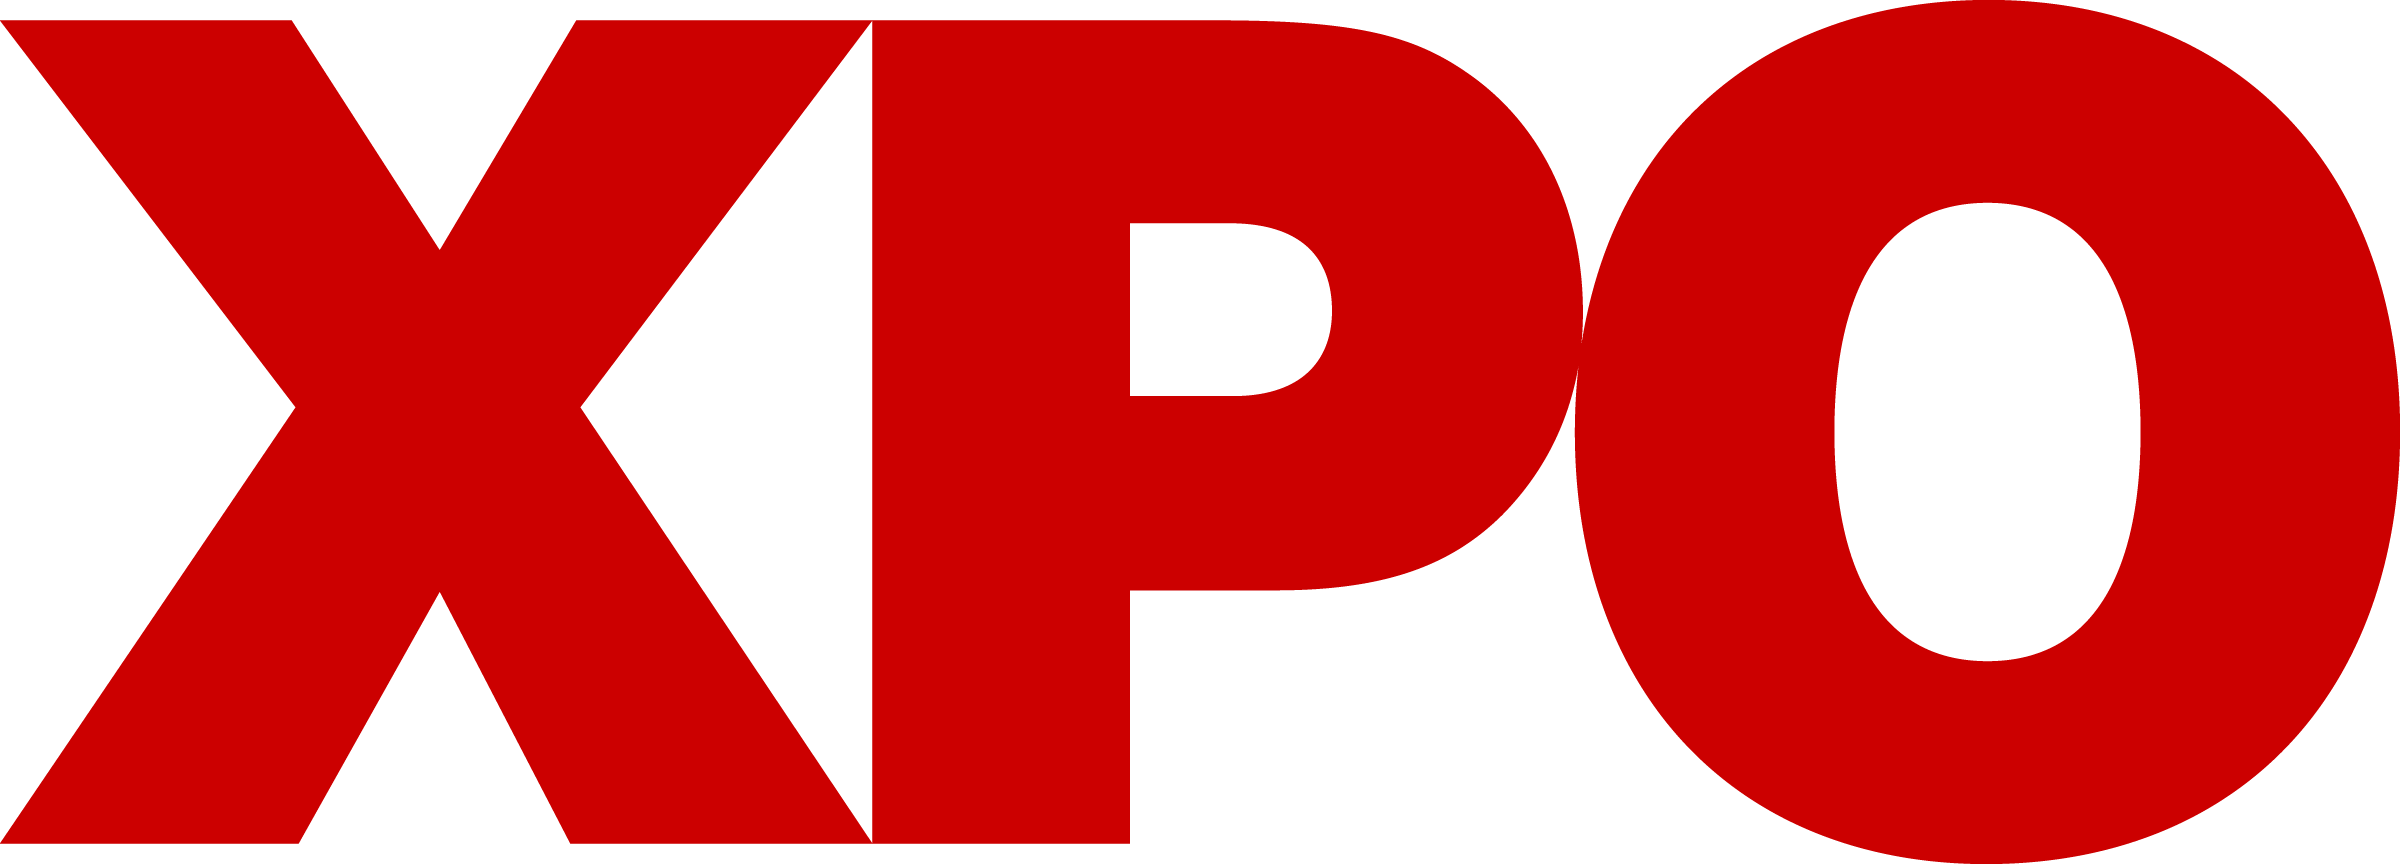 XPO Announces Pricing of Refinancing Transactions 378aec62-5d02-4947-a49f-6b239fc7402d?size=1